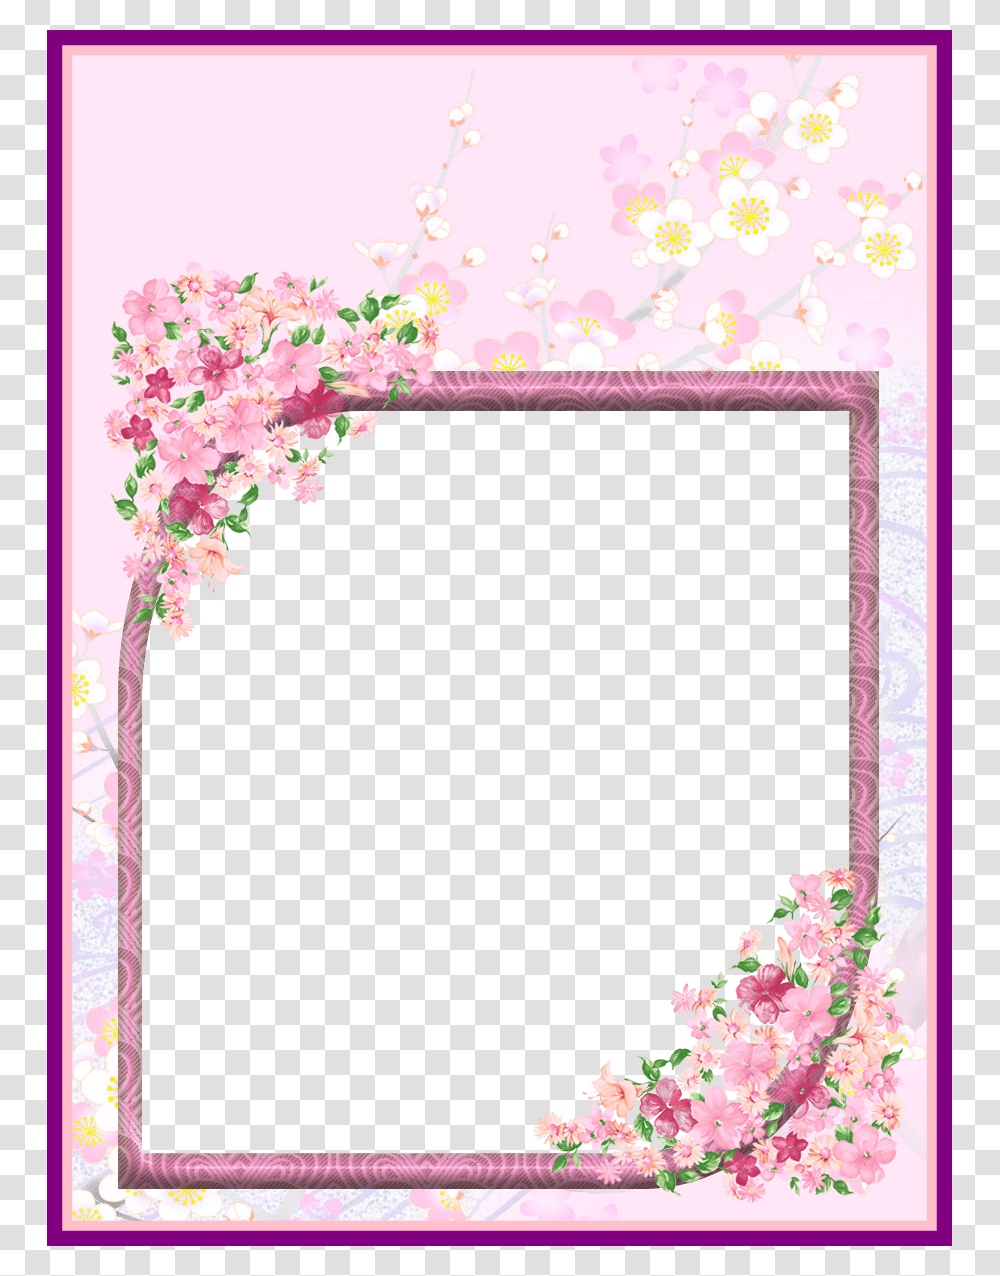 Wednesday Prayers Amp Blessings, Floral Design, Pattern Transparent Png